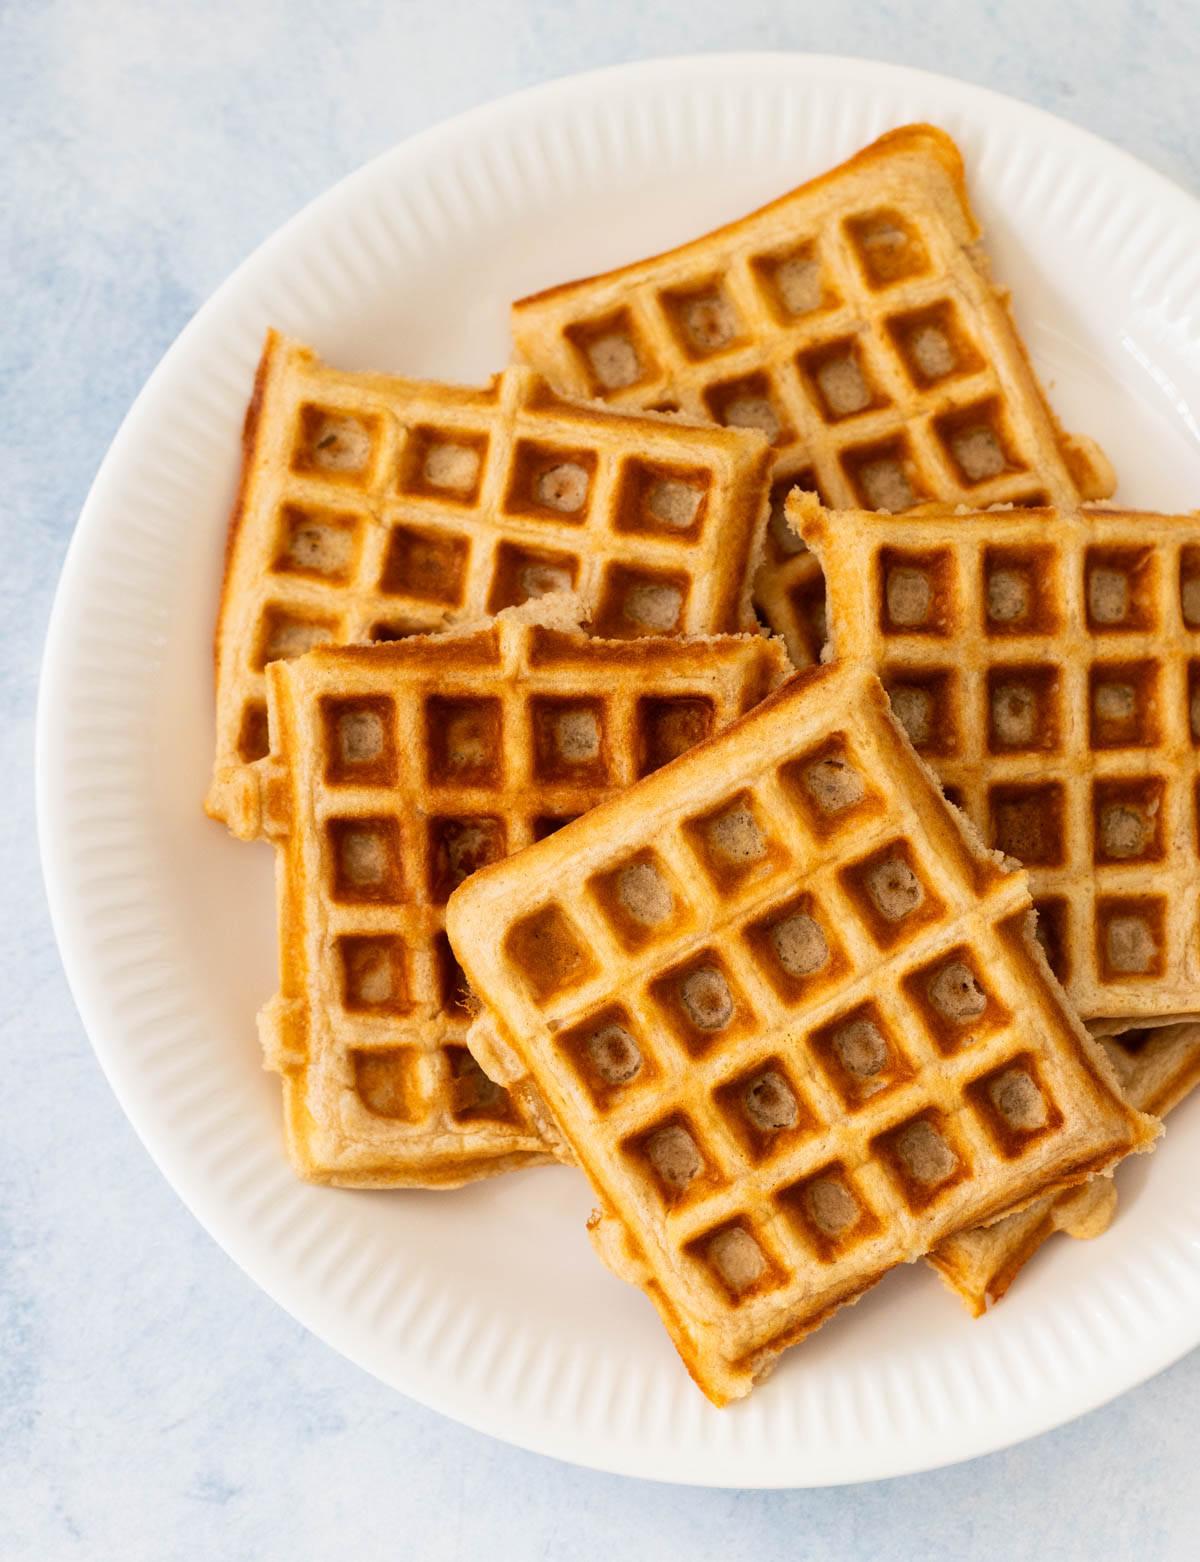 A white plate is filled with 5 golden brown buttermilk waffles.